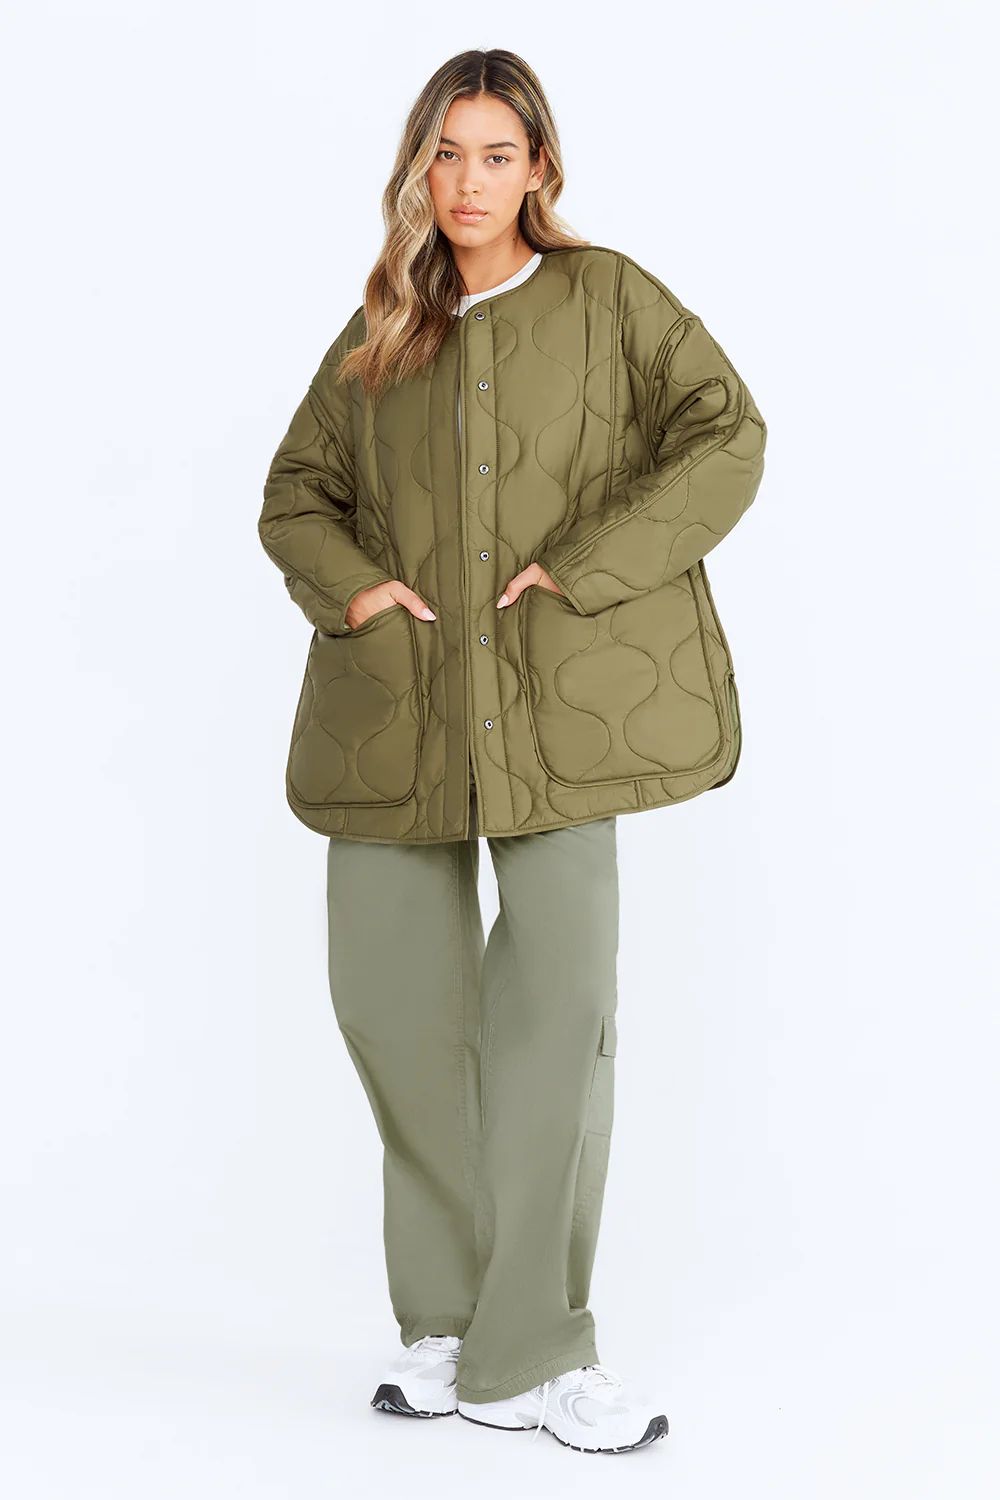 OVERSIZED REVERSIBLE QUILTED JACKET- LIGHT OLIVE AND ARMY GREEN | TALA (UK)